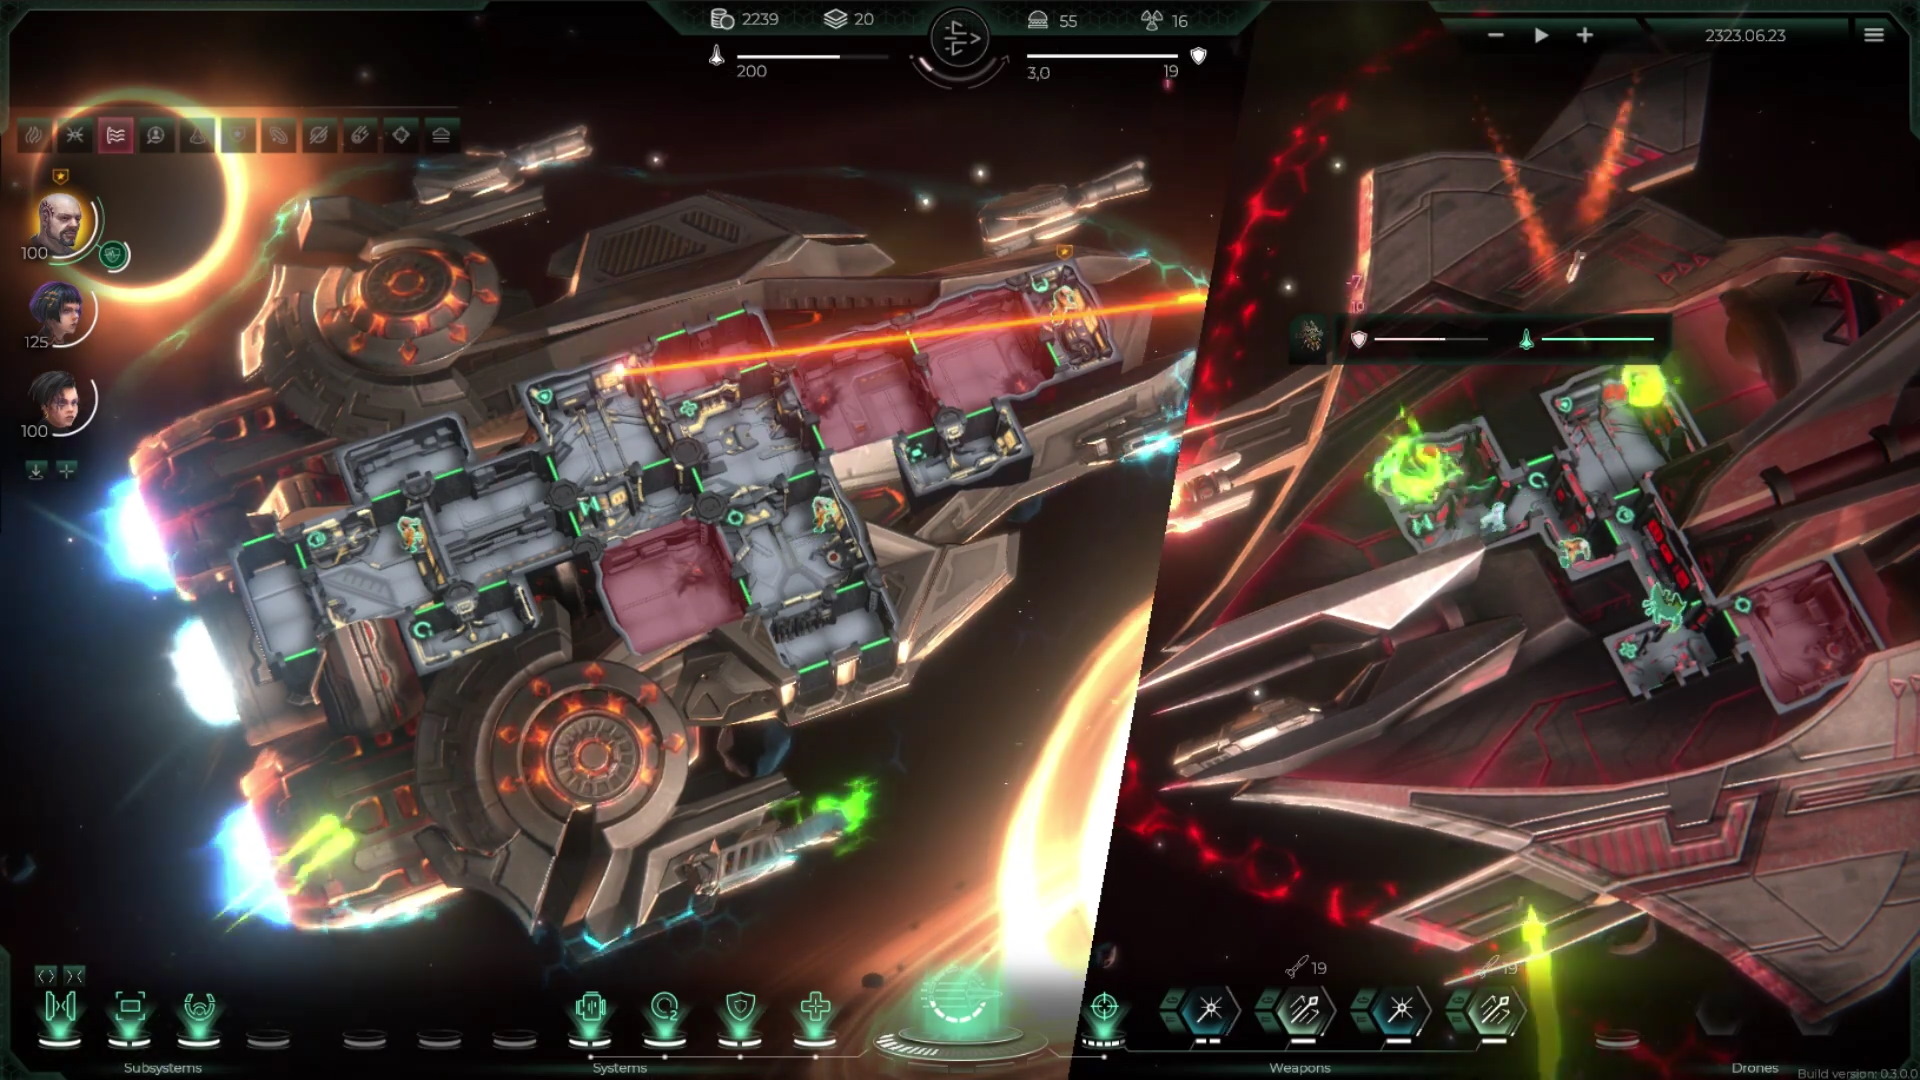 Trigon: Space Story instal the new version for windows